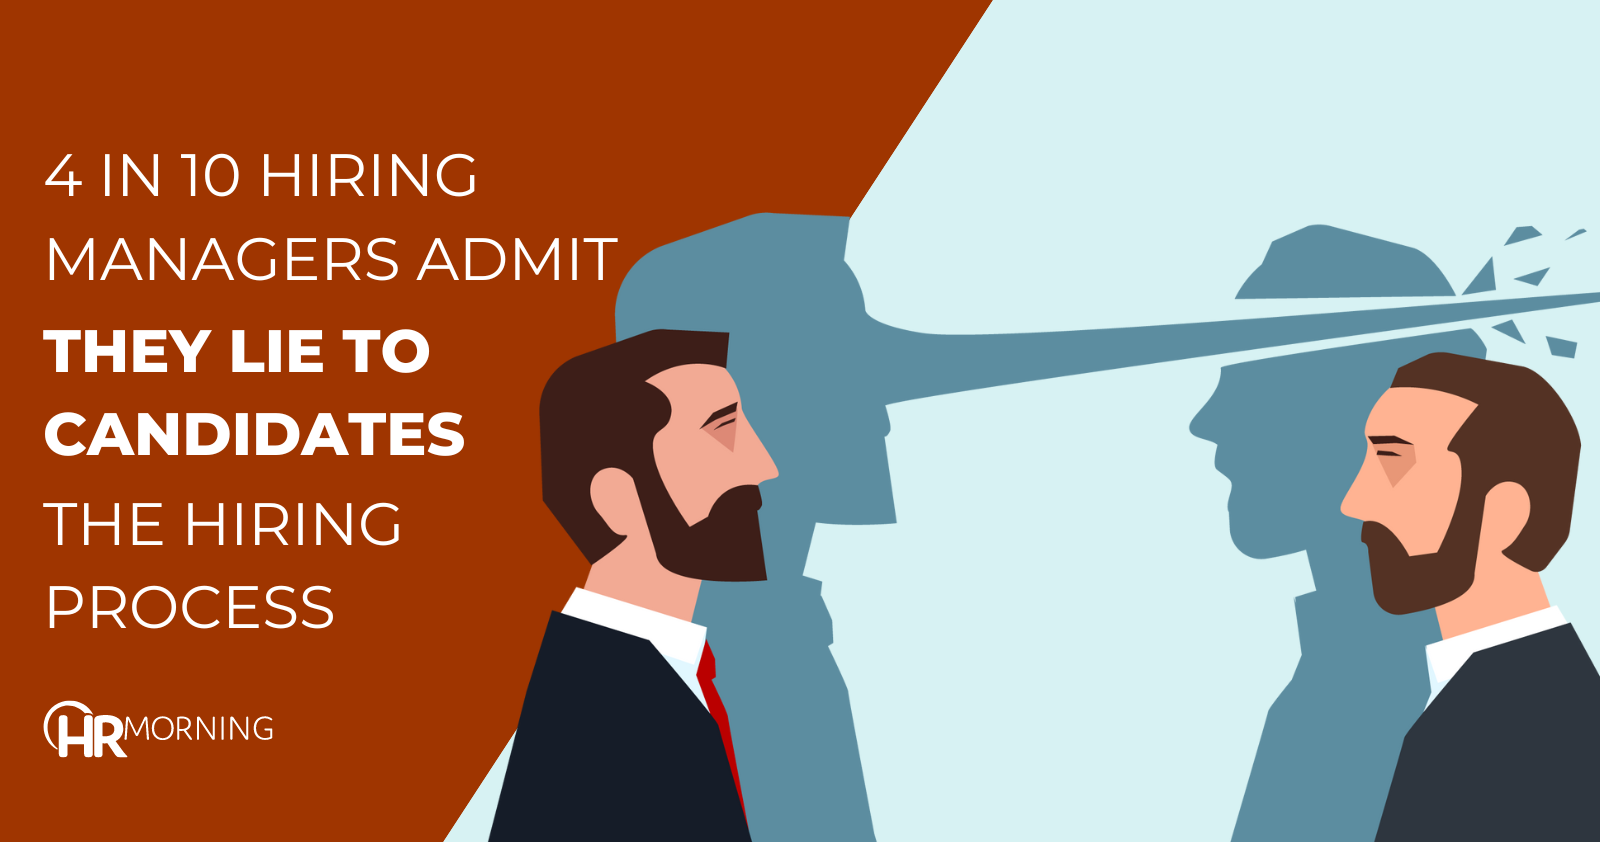 4 in 10 hiring managers admit they lie to candidates in the hiring process